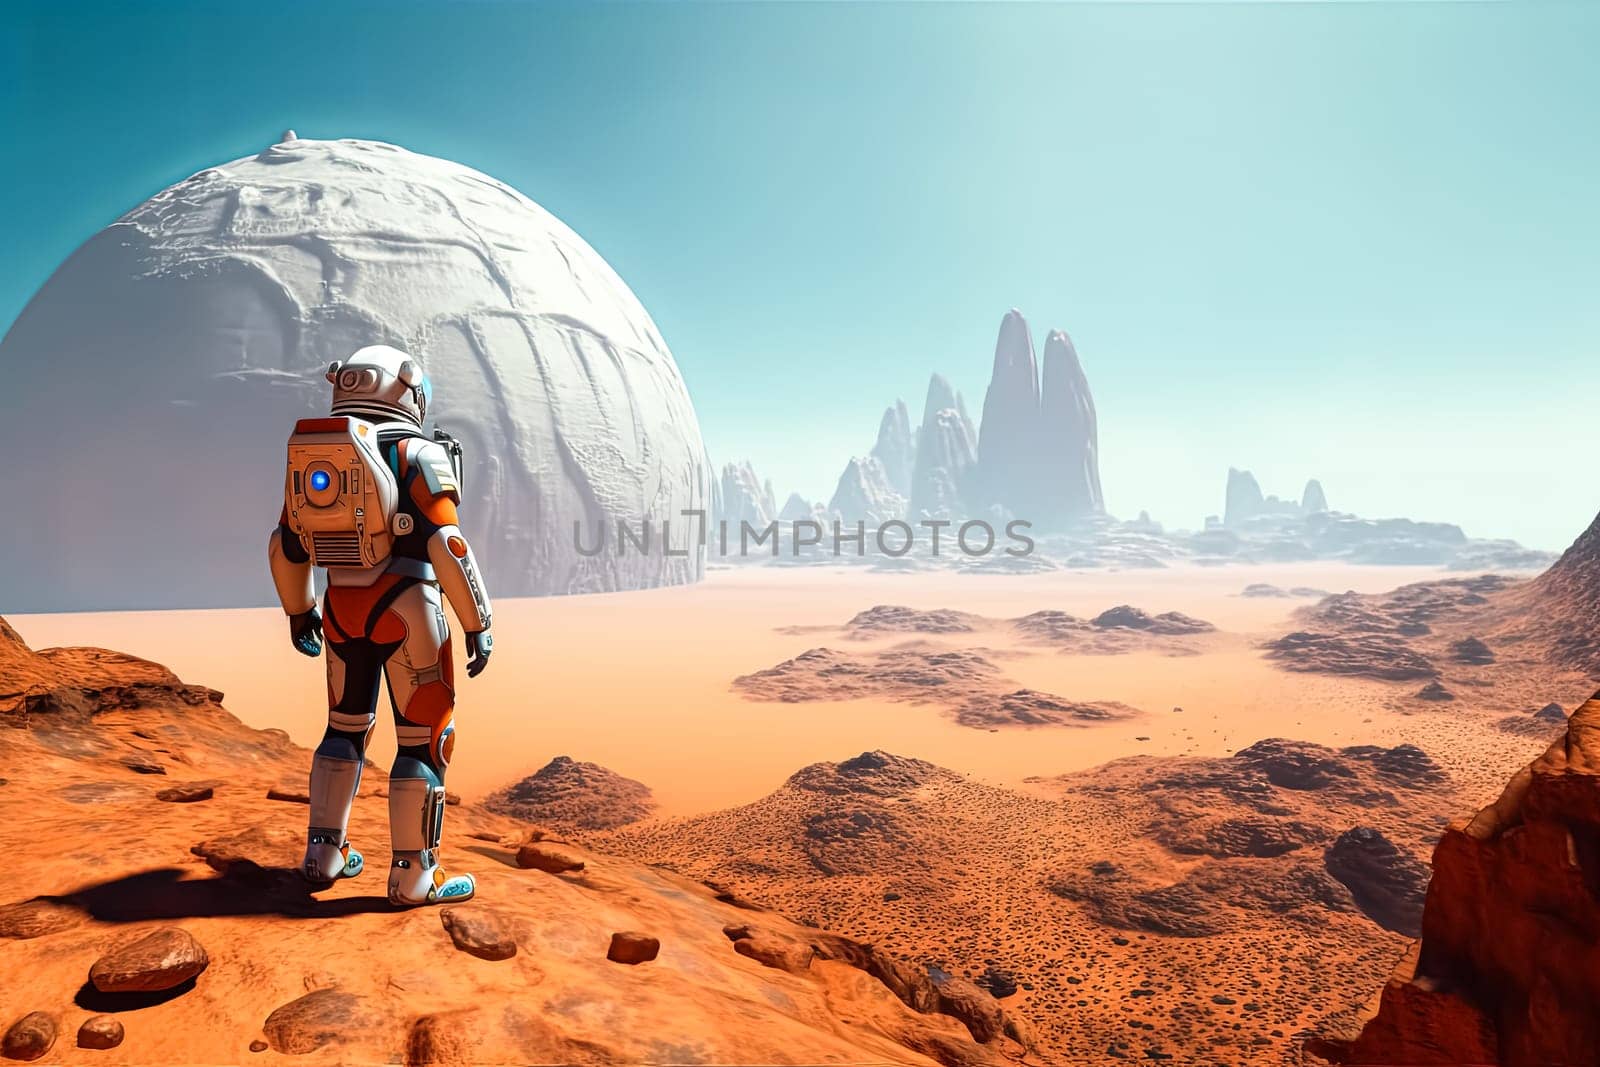 A man in a space suit stands on a rocky surface looking up at a large planet. The scene is set in a barren, desolate landscape with no signs of life